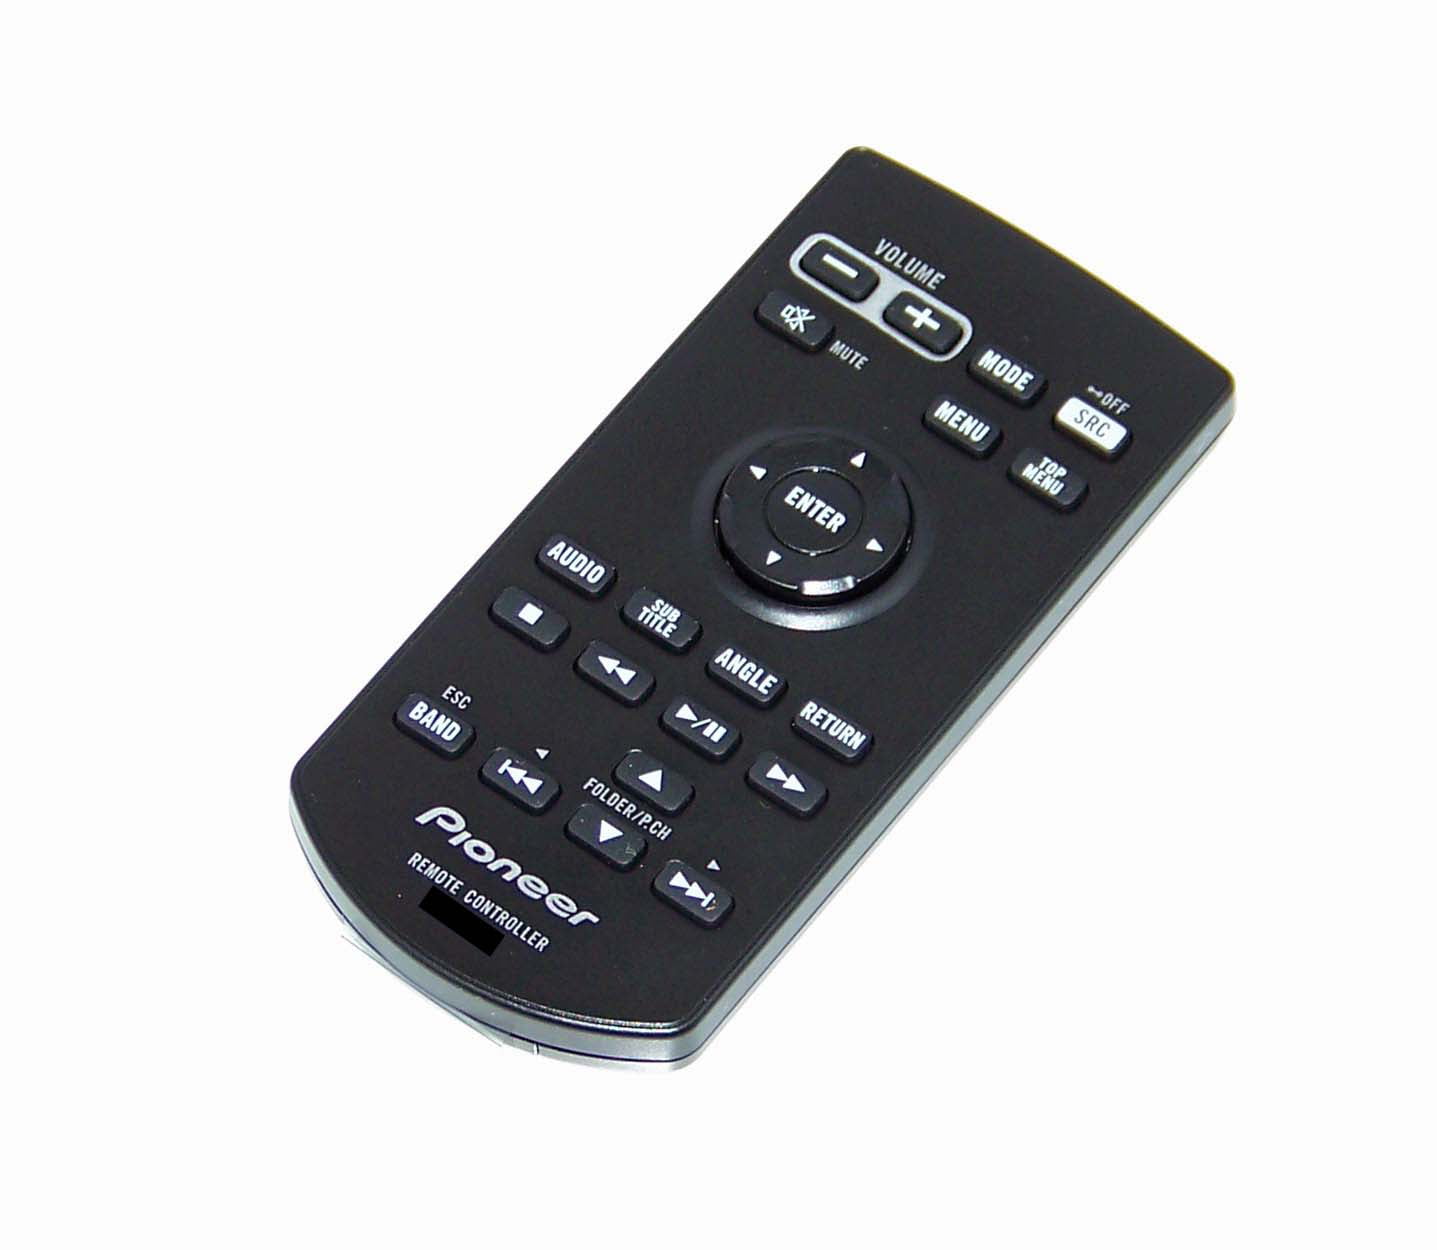 NEW AUTO STEREO CAR REMOTE CONTROL for PIONEER AVH-X1500DVD